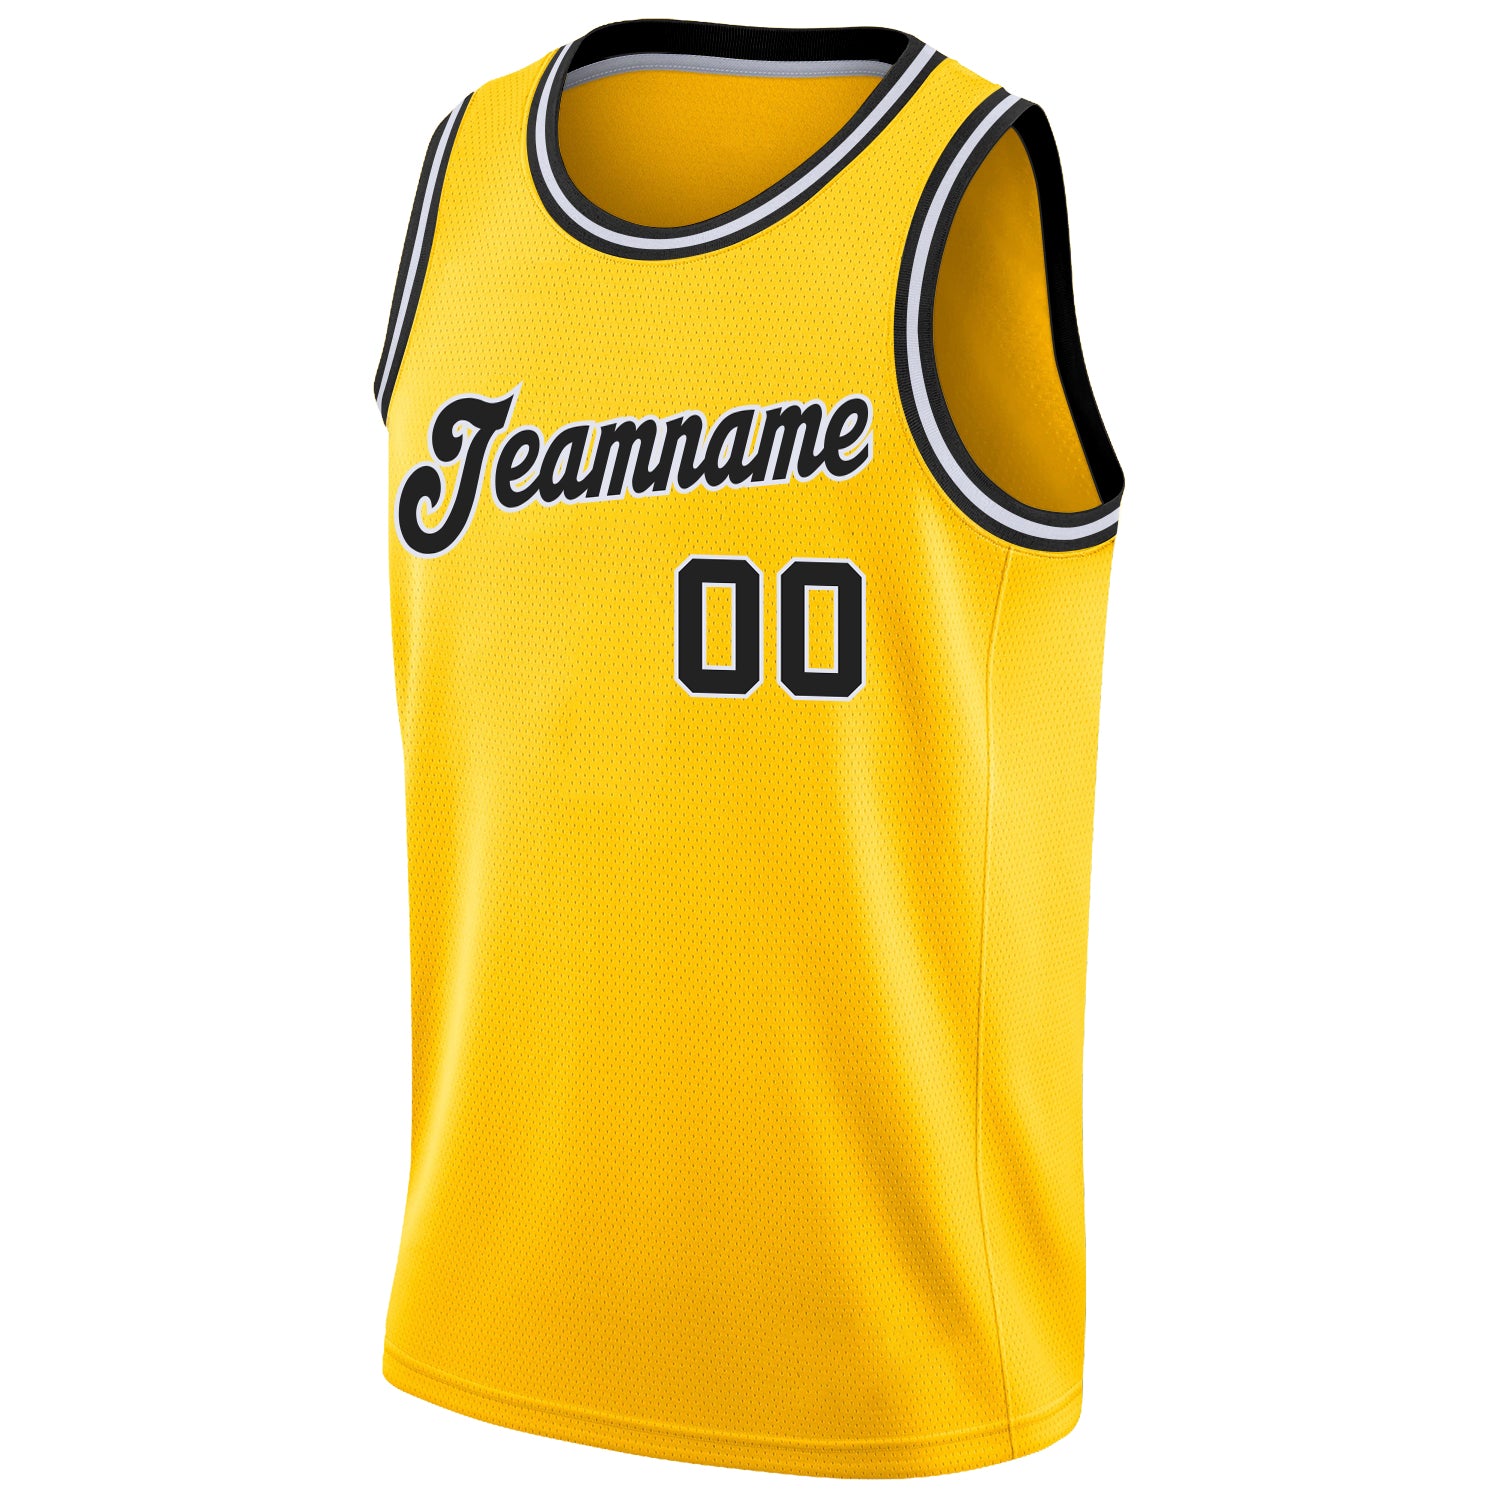 BEANTOWN BULLS Blue Red Gold and White Basketball Uniforms, Jersey